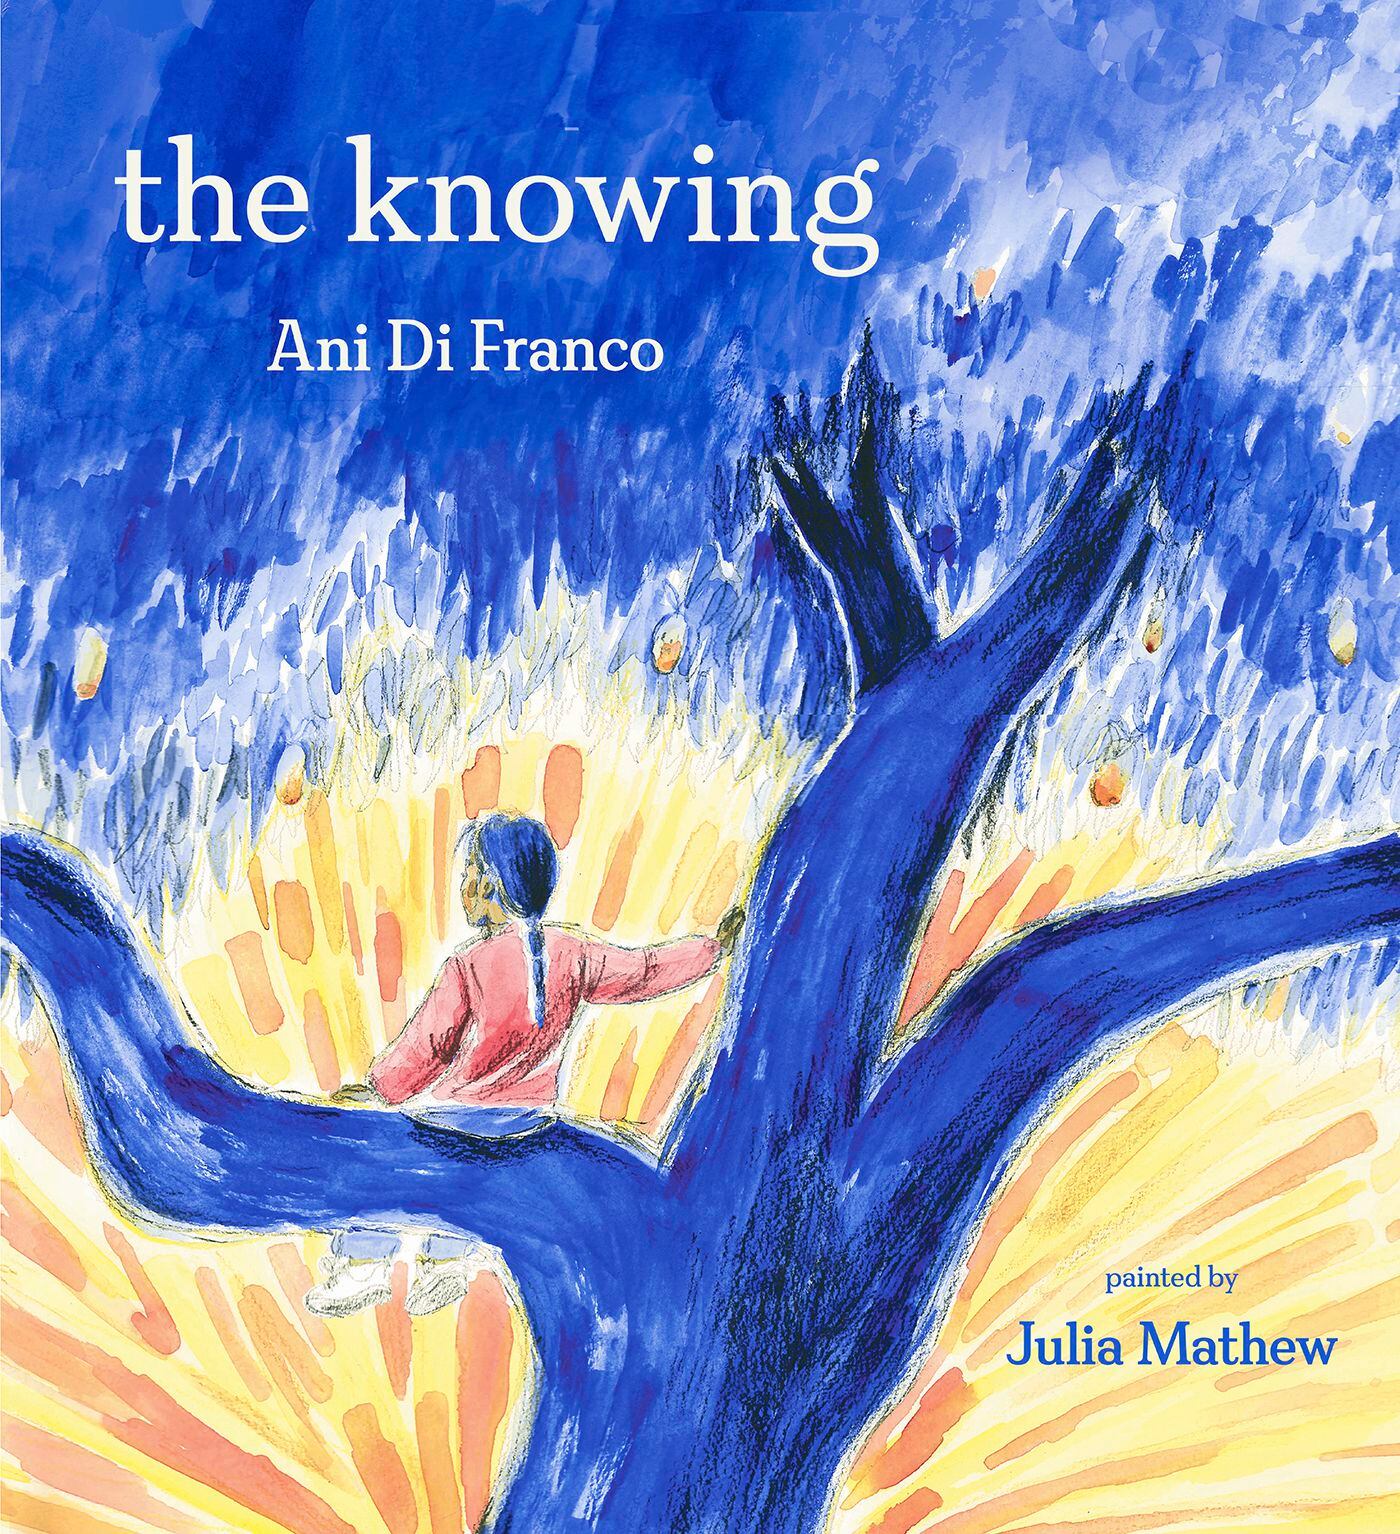 Ani DiFranco picture book is scheduled for March 2023